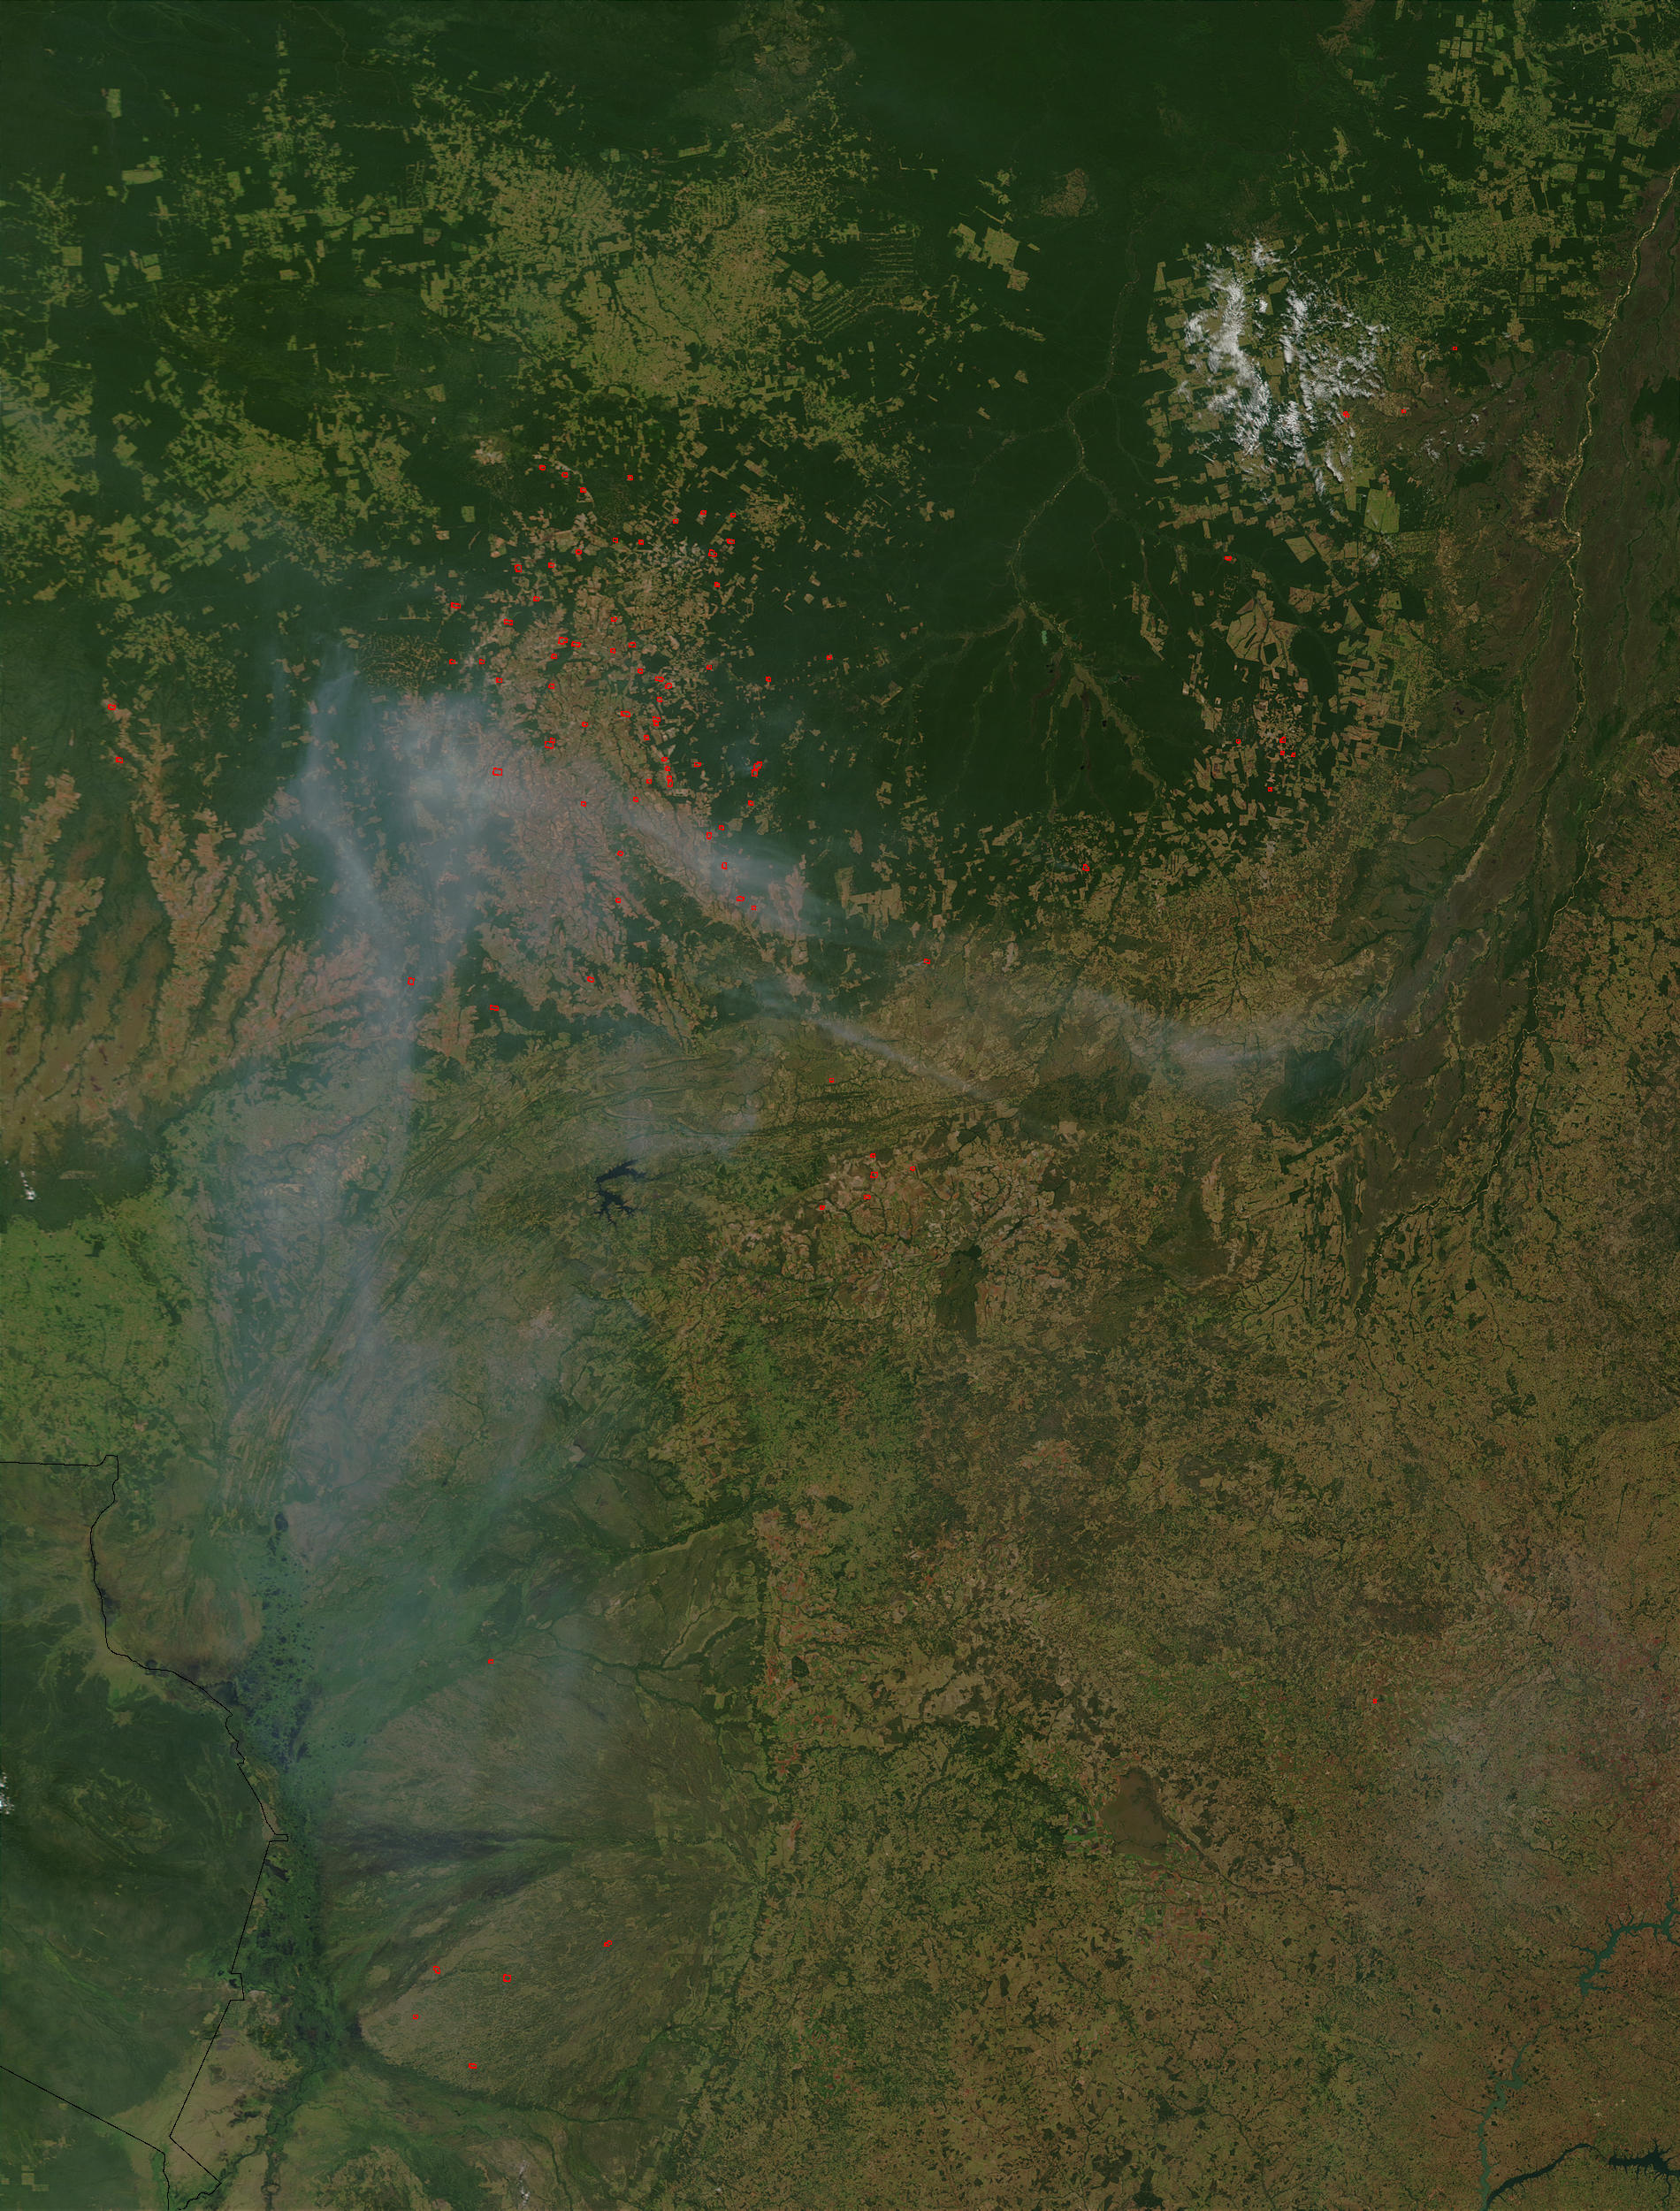 Fires and smoke in Mato Grosso State, Brazil - related image preview